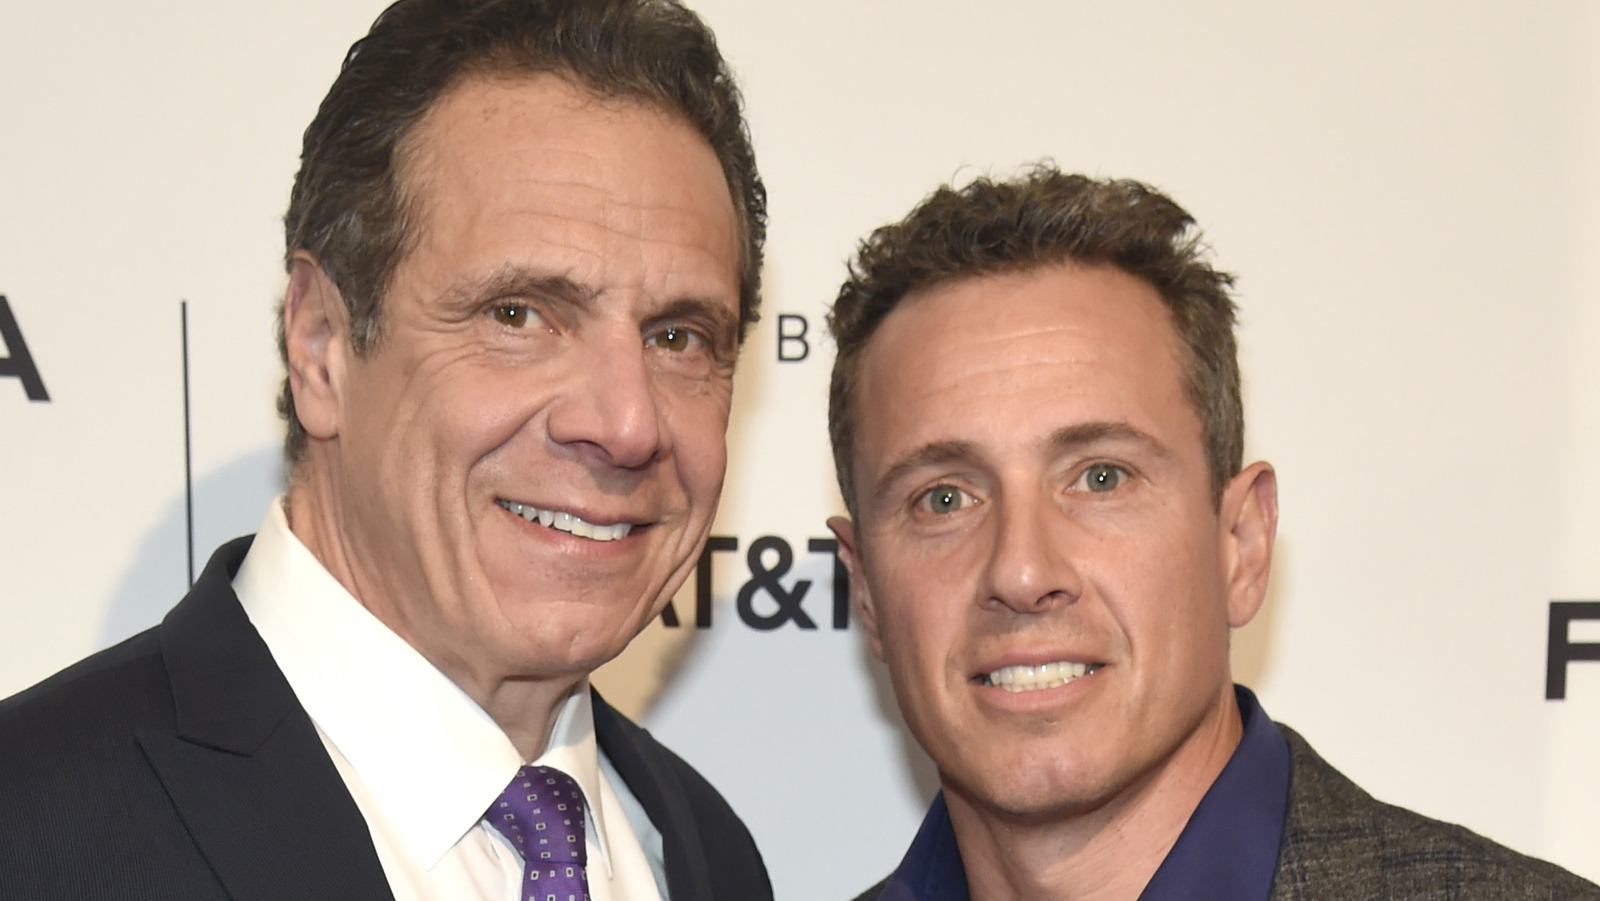 Inside Andrew Cuomo's Relationship With Brother Chris